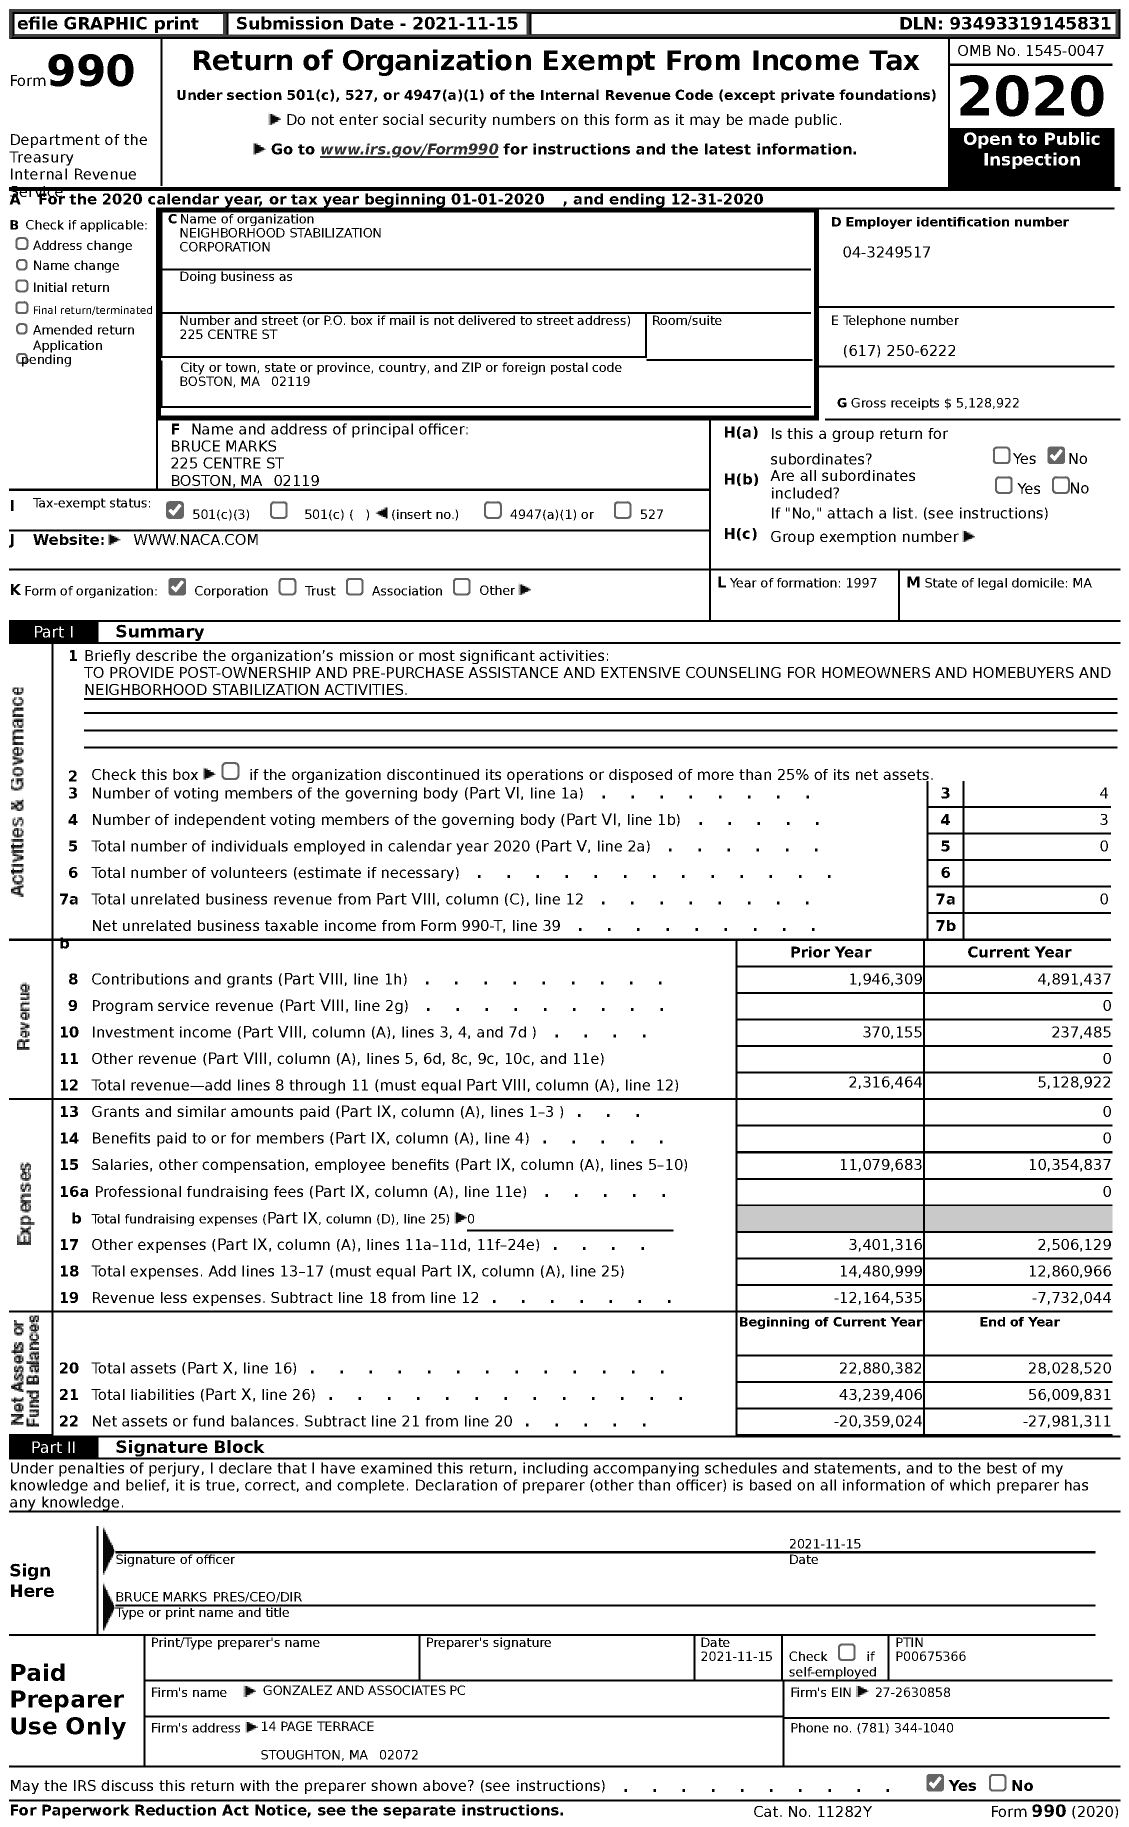 Image of first page of 2020 Form 990 for Neighborhood Stabilization Corporation (NACA)